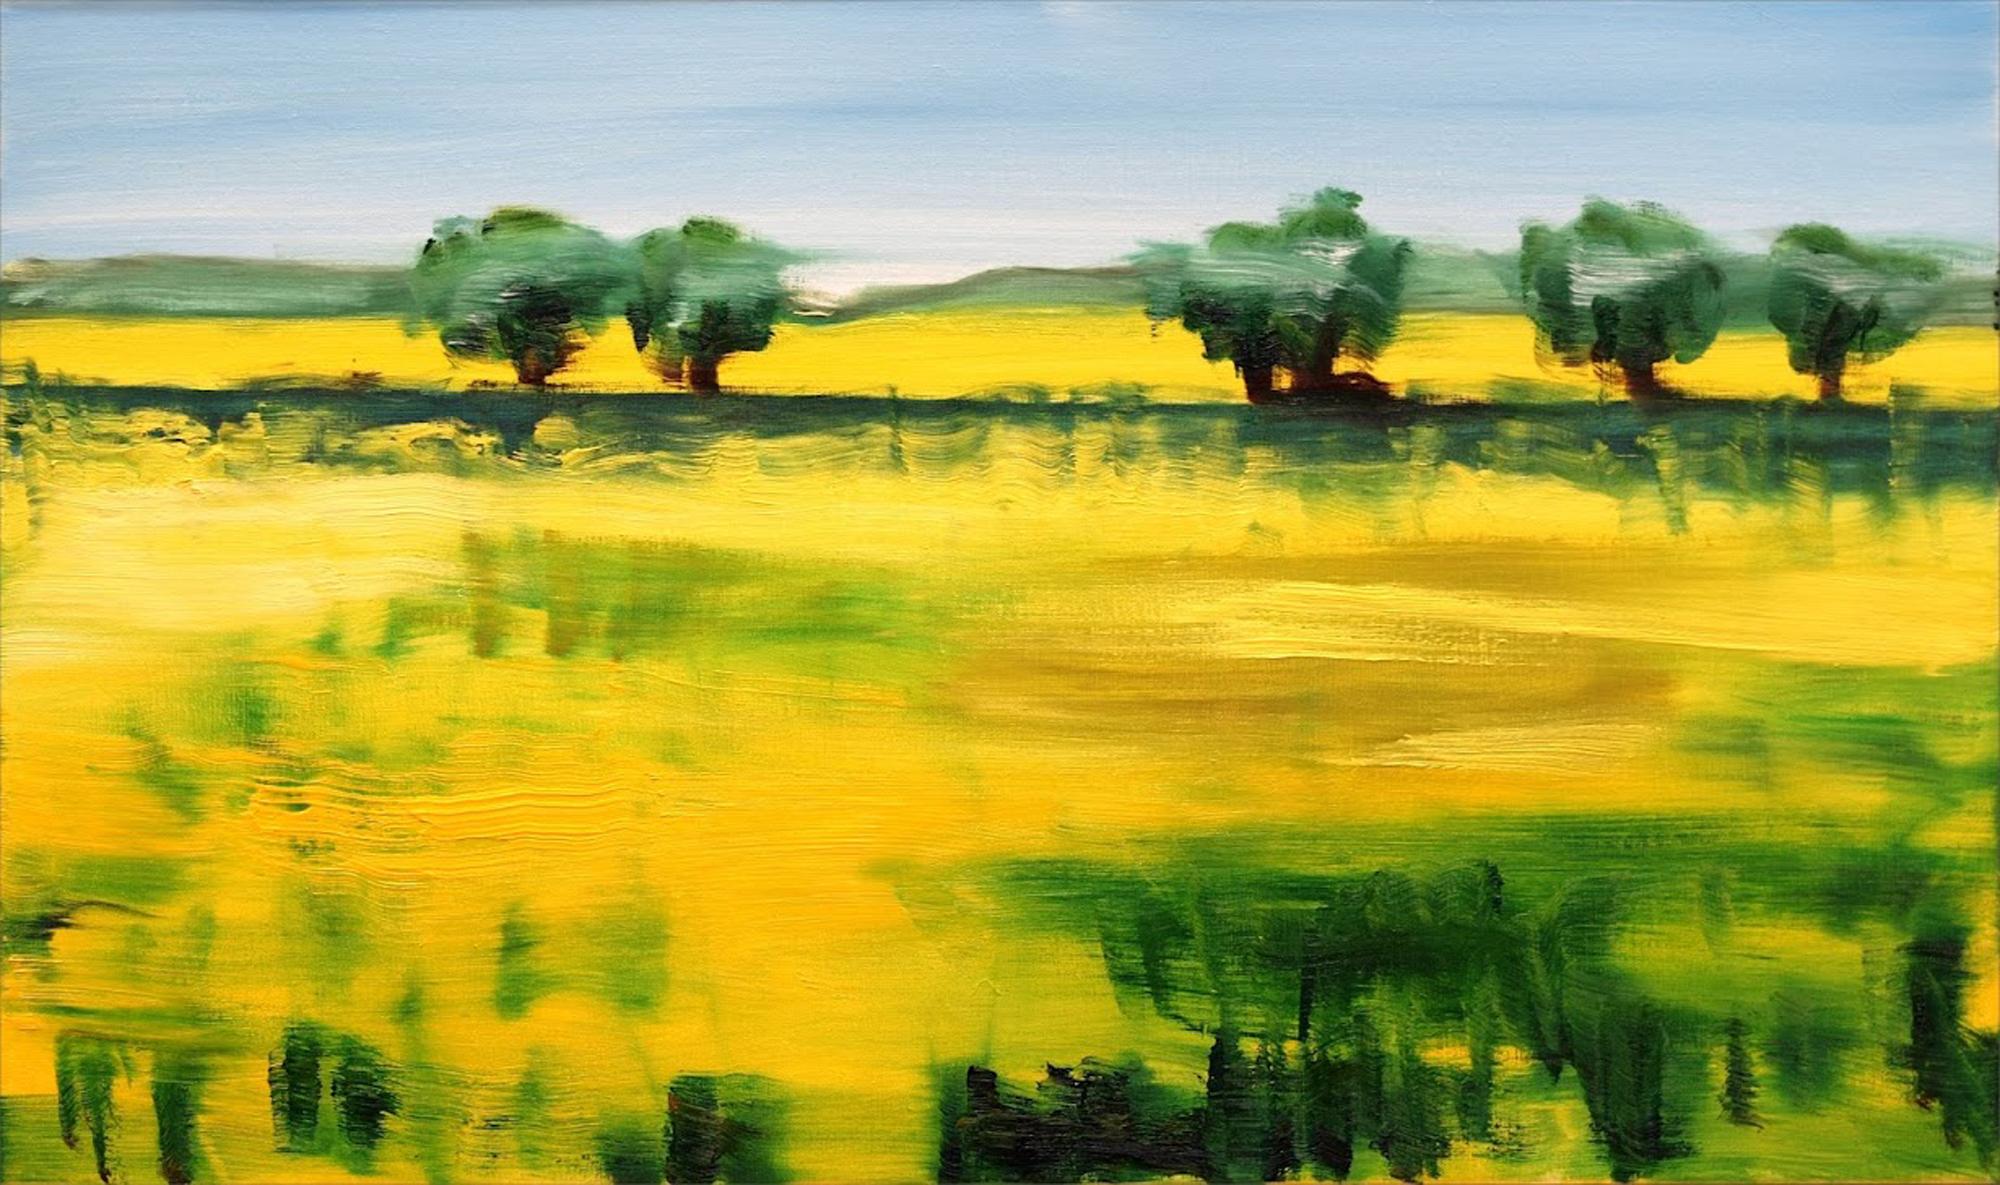 Open Fields II - Yellow and Green Abstract Landscape Oil Painting on Canvas